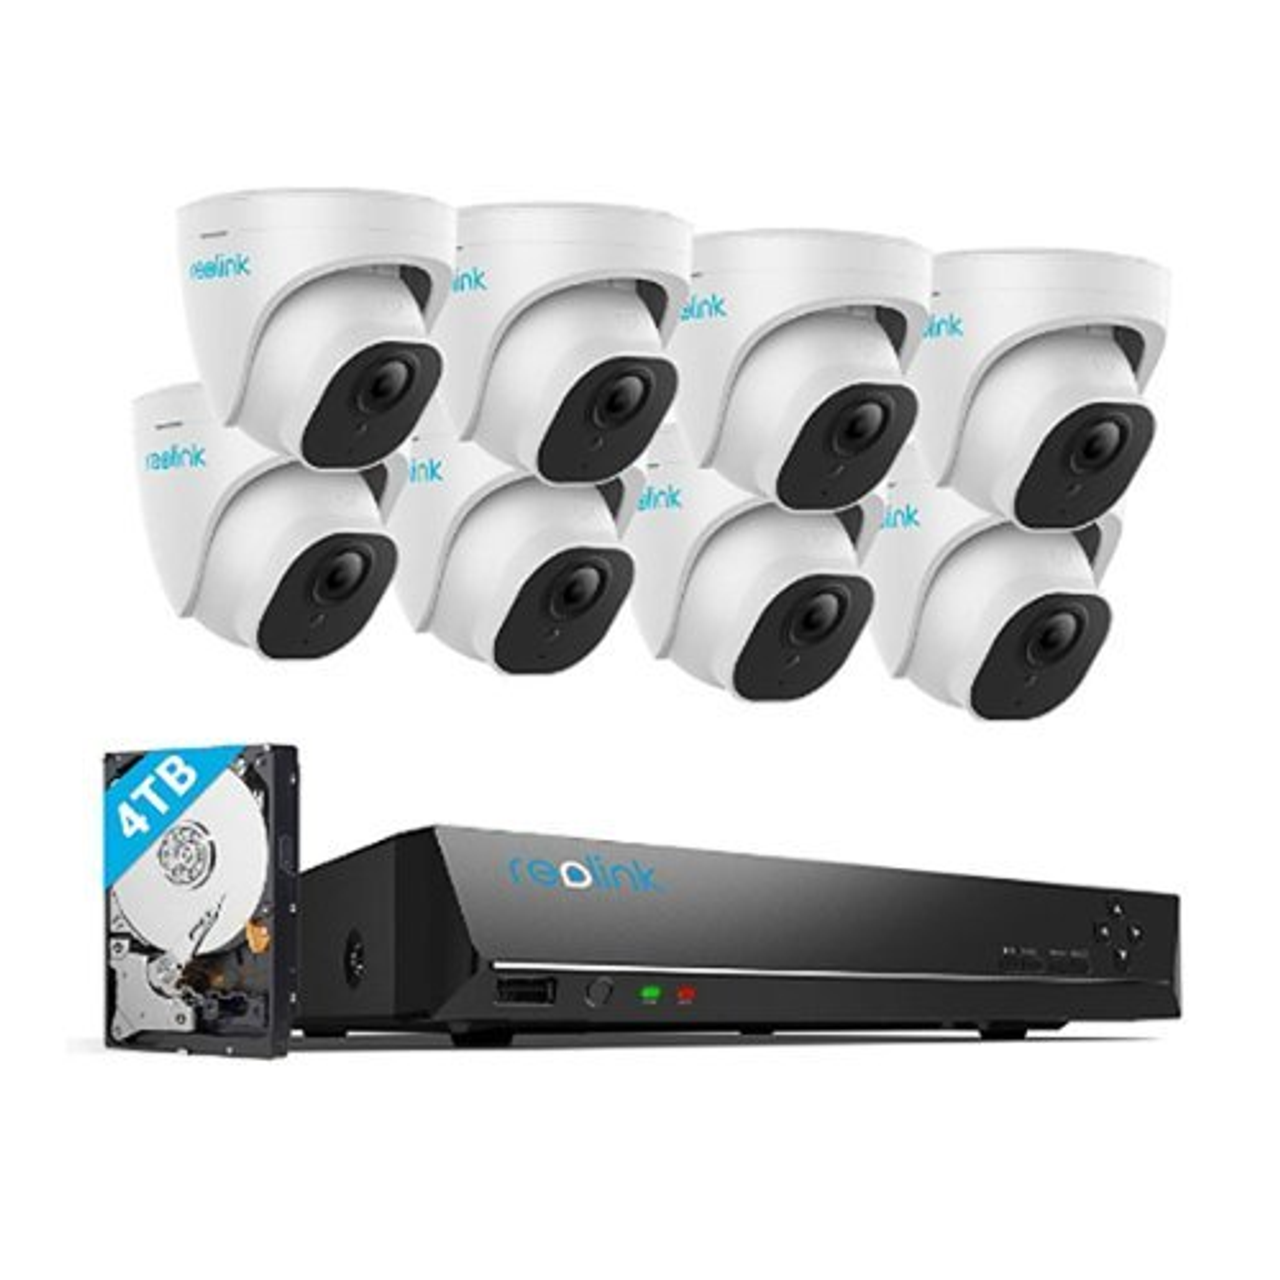 Reolink - 16 Channel 5K UHD NVR 8x5K Dome Cameras with Smart Detection Security System - White,Black